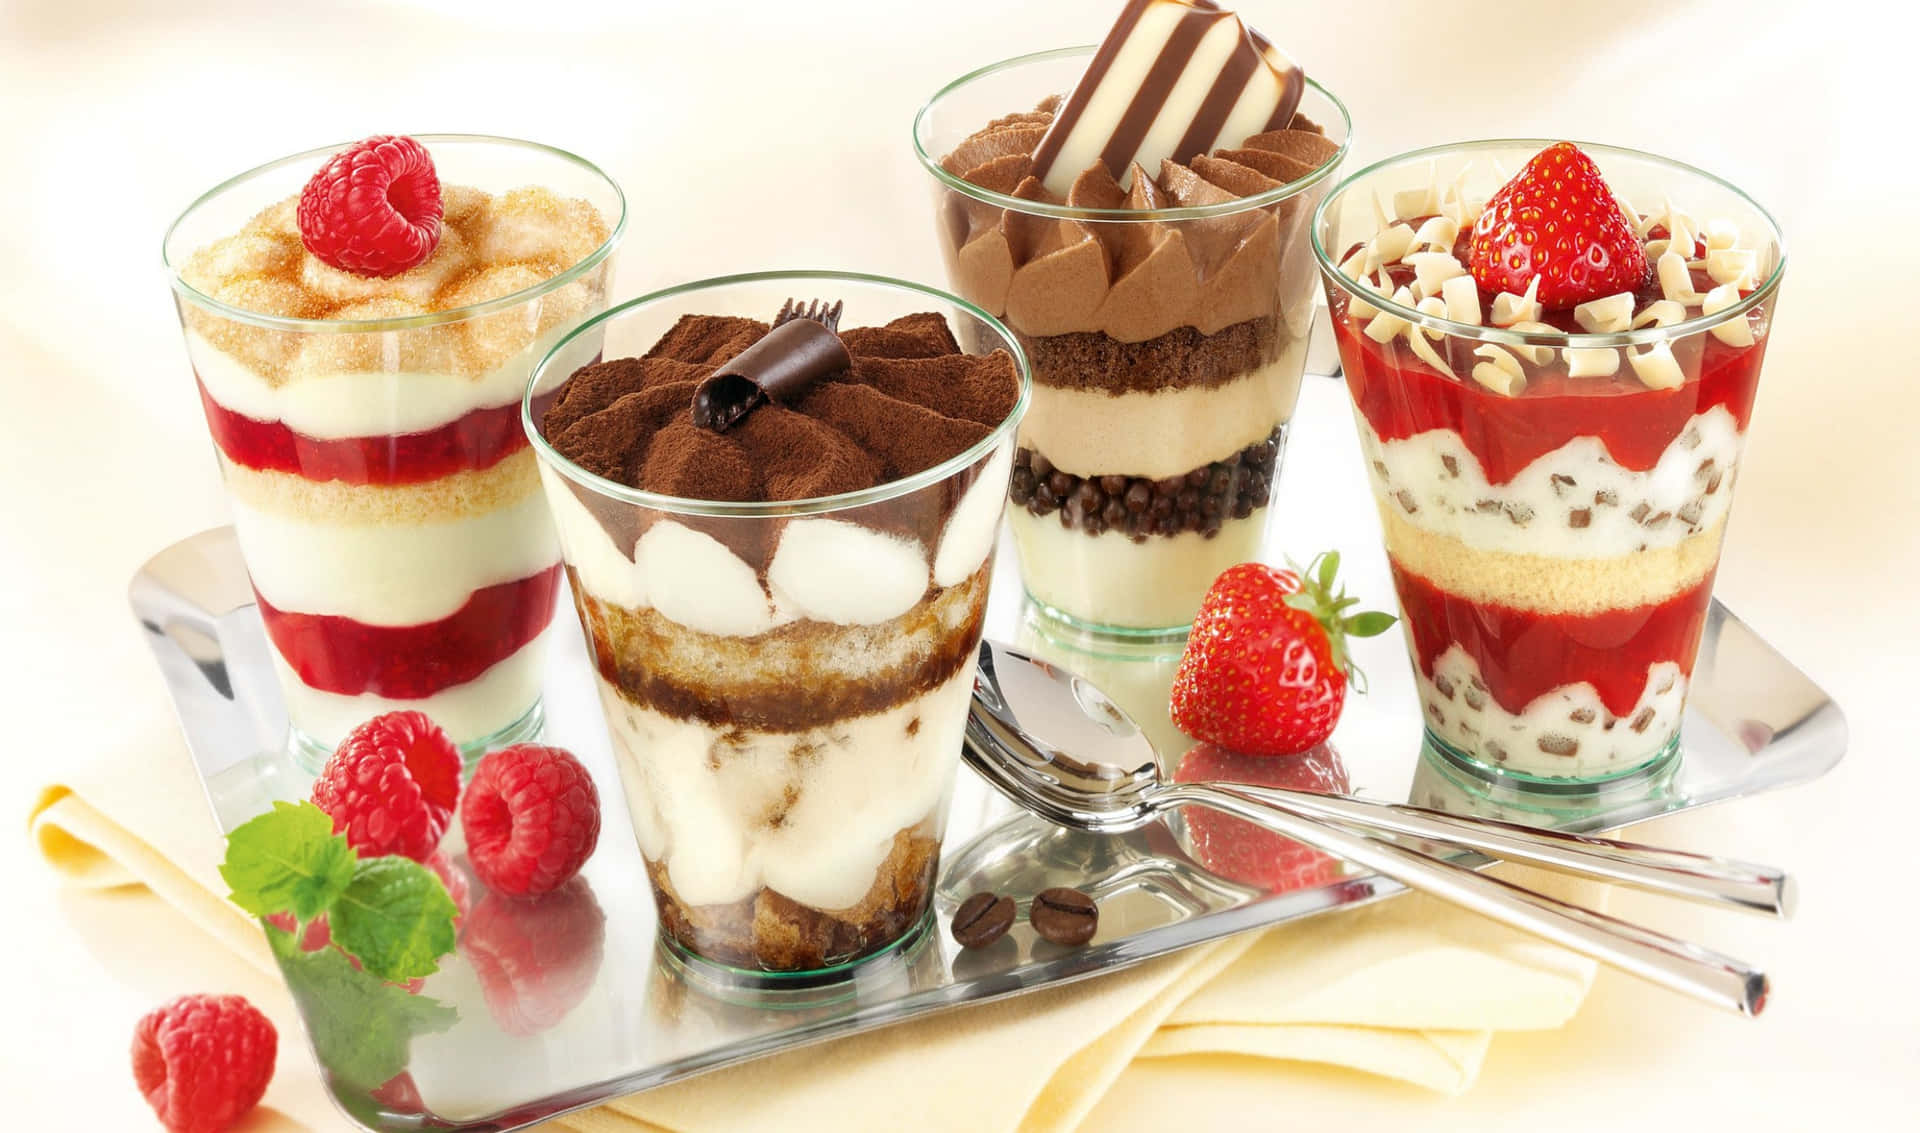 A Tray Of Desserts With Strawberries And Chocolate